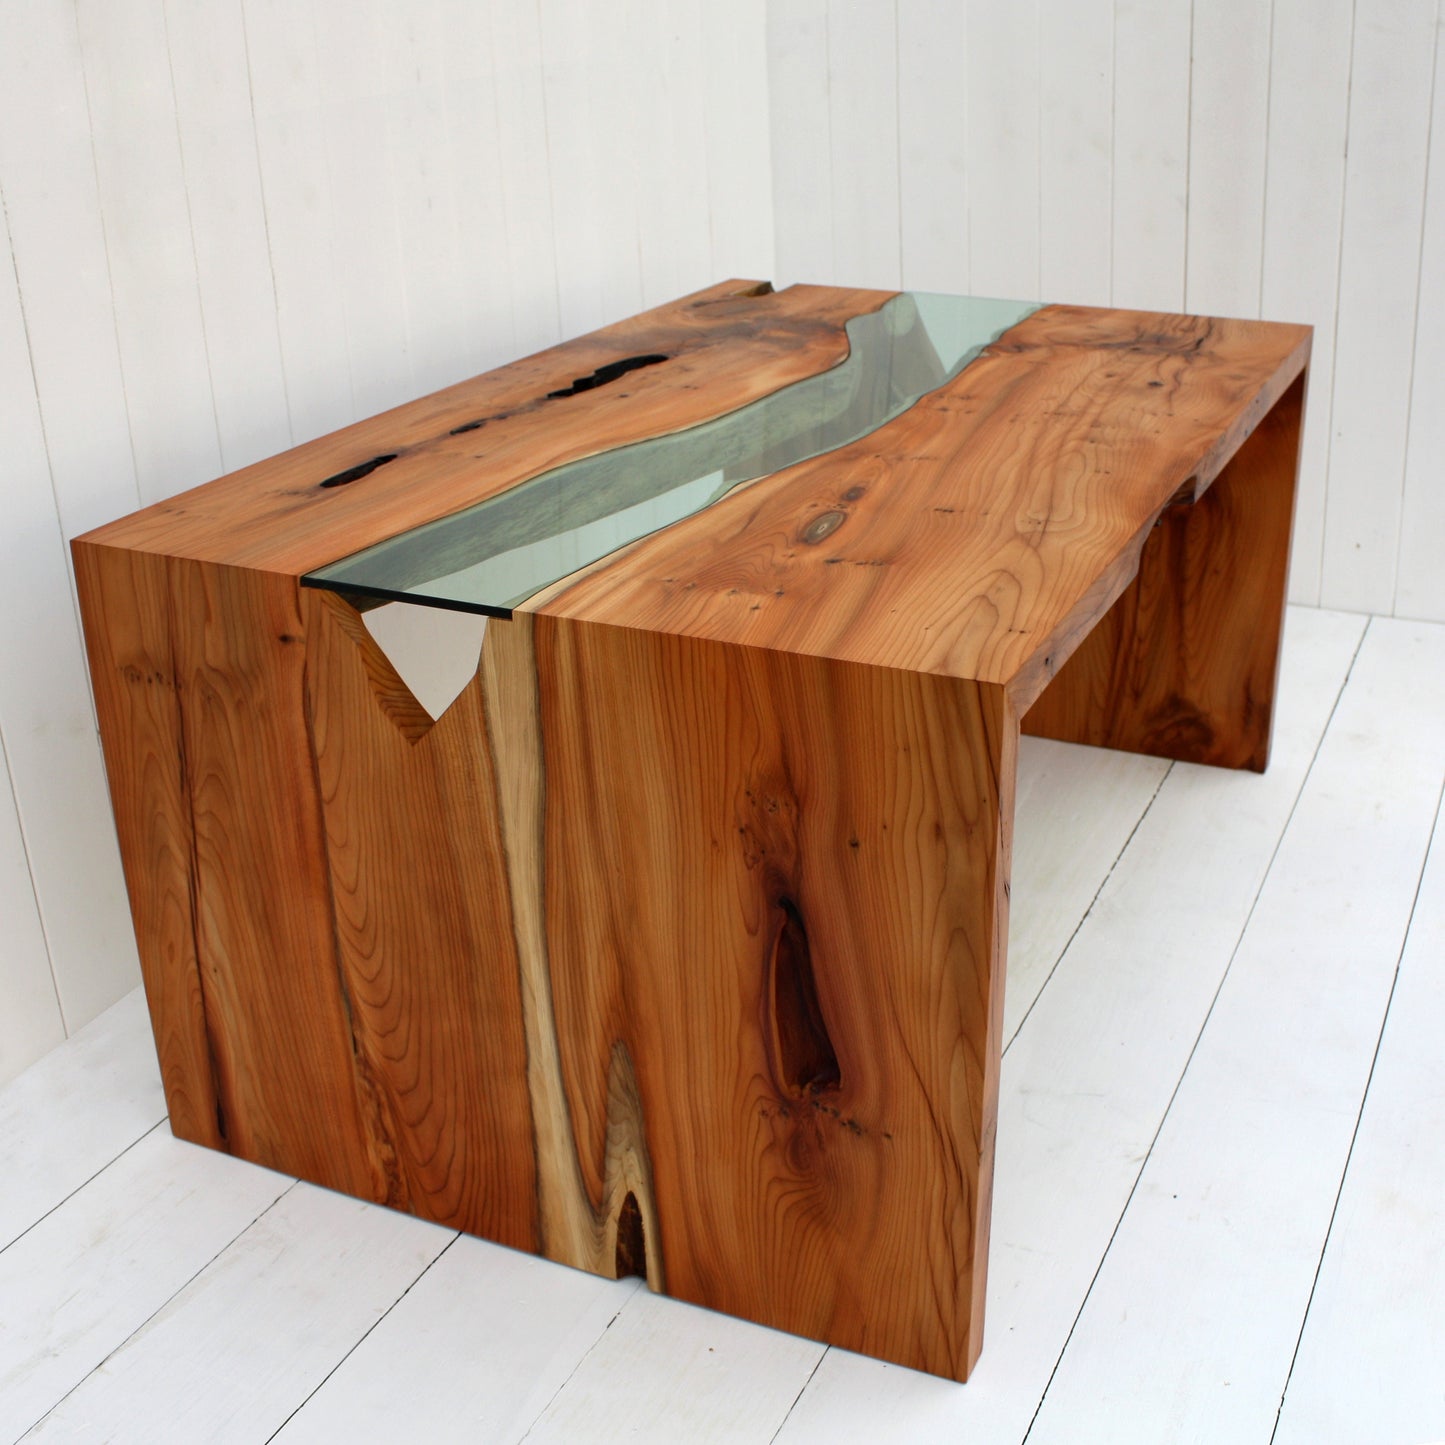 Yew and glass river coffee table